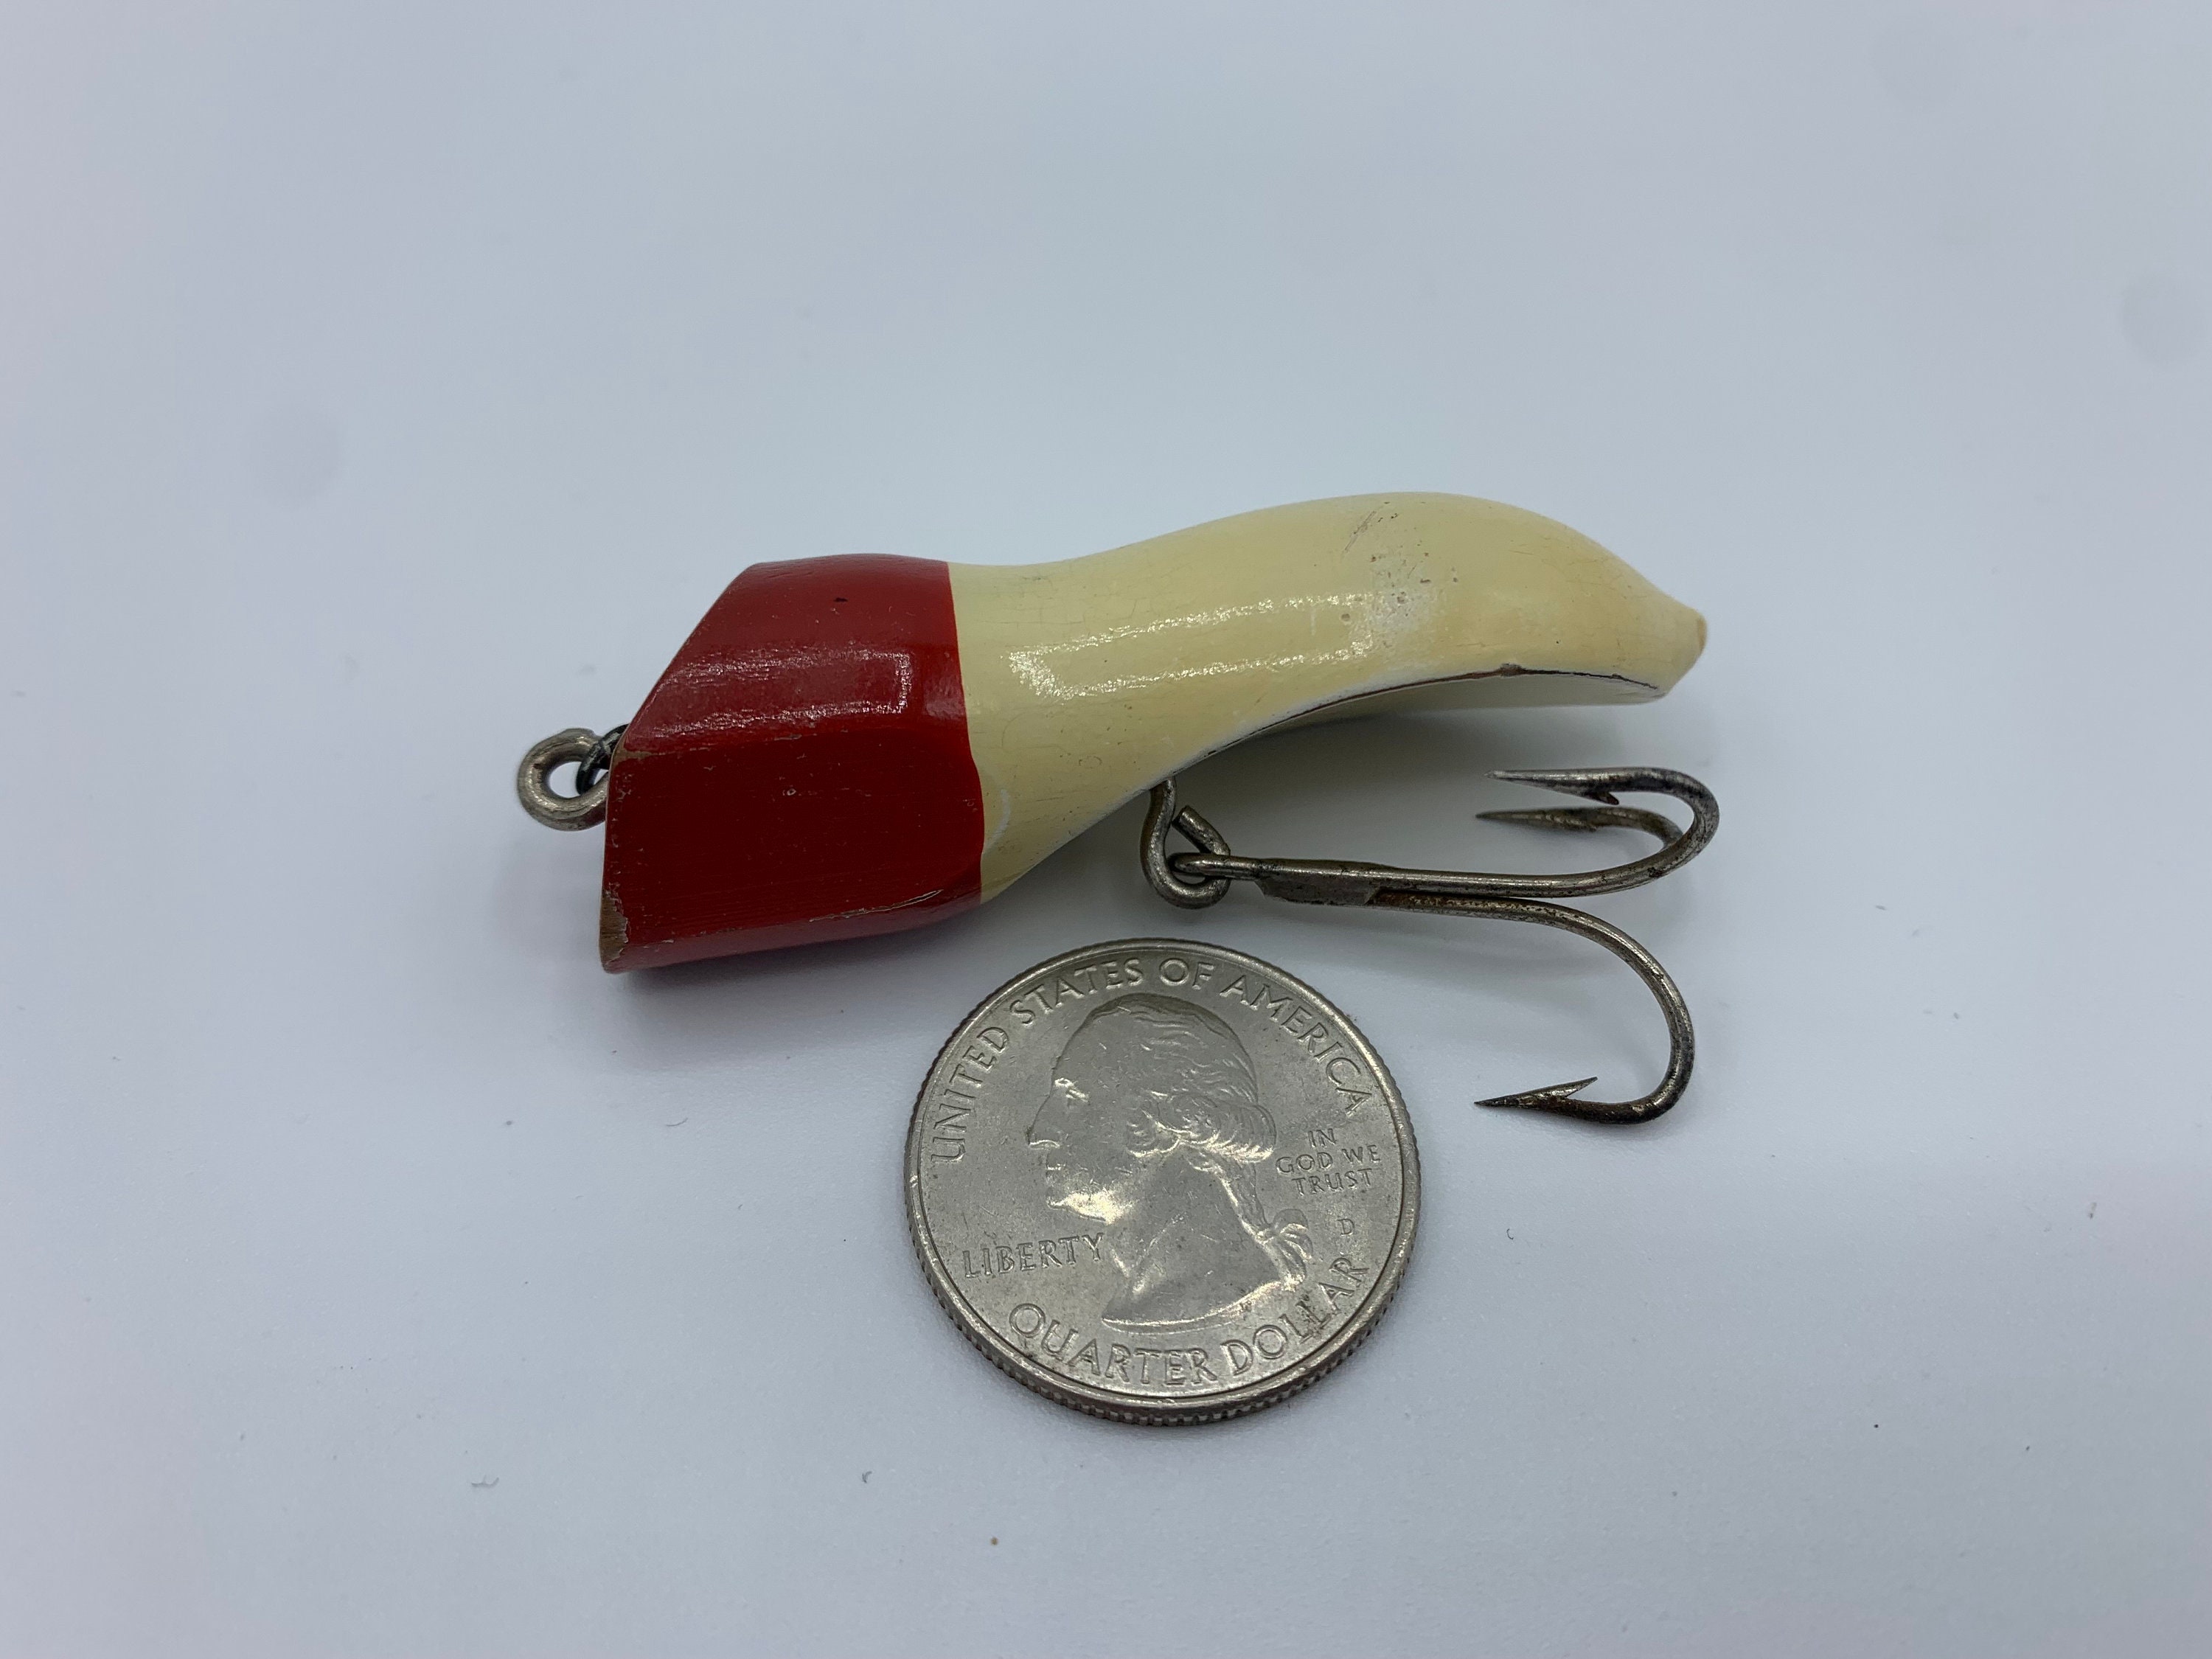 Pflueger Wizard Lure Ad 1904 - Fin & Flame